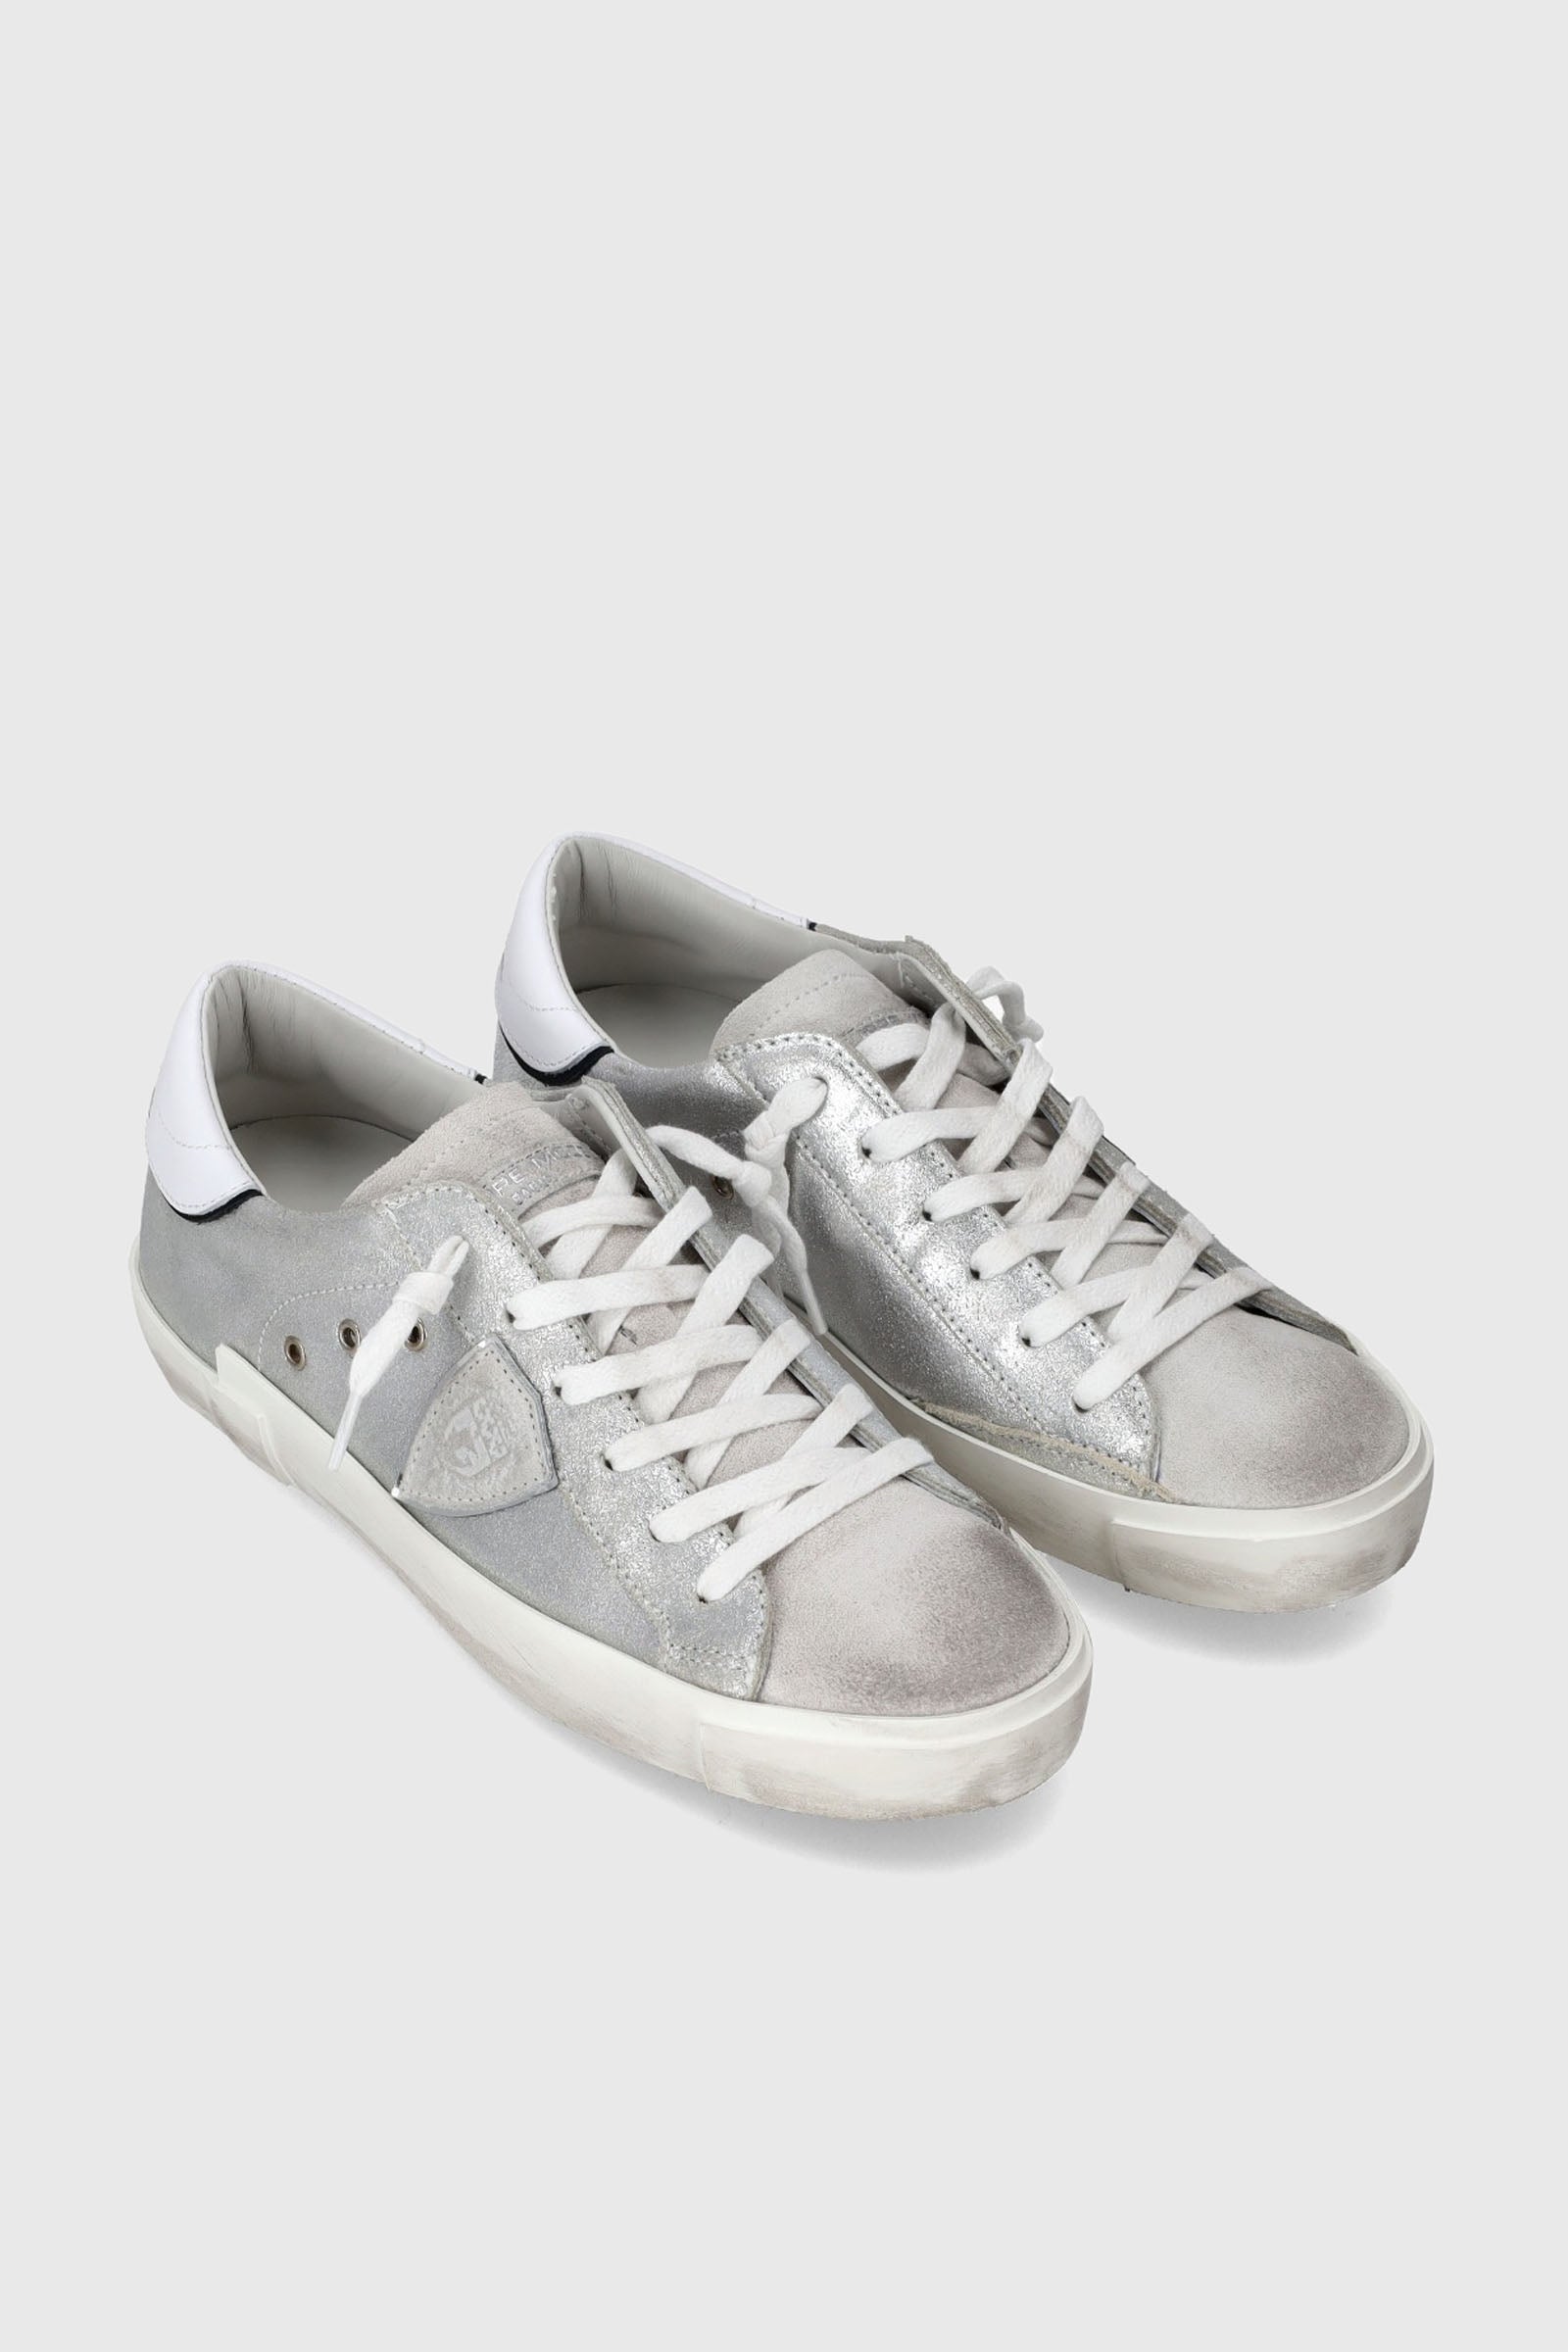 Philippe Model Sneakers PRSX Silver Leather - 2